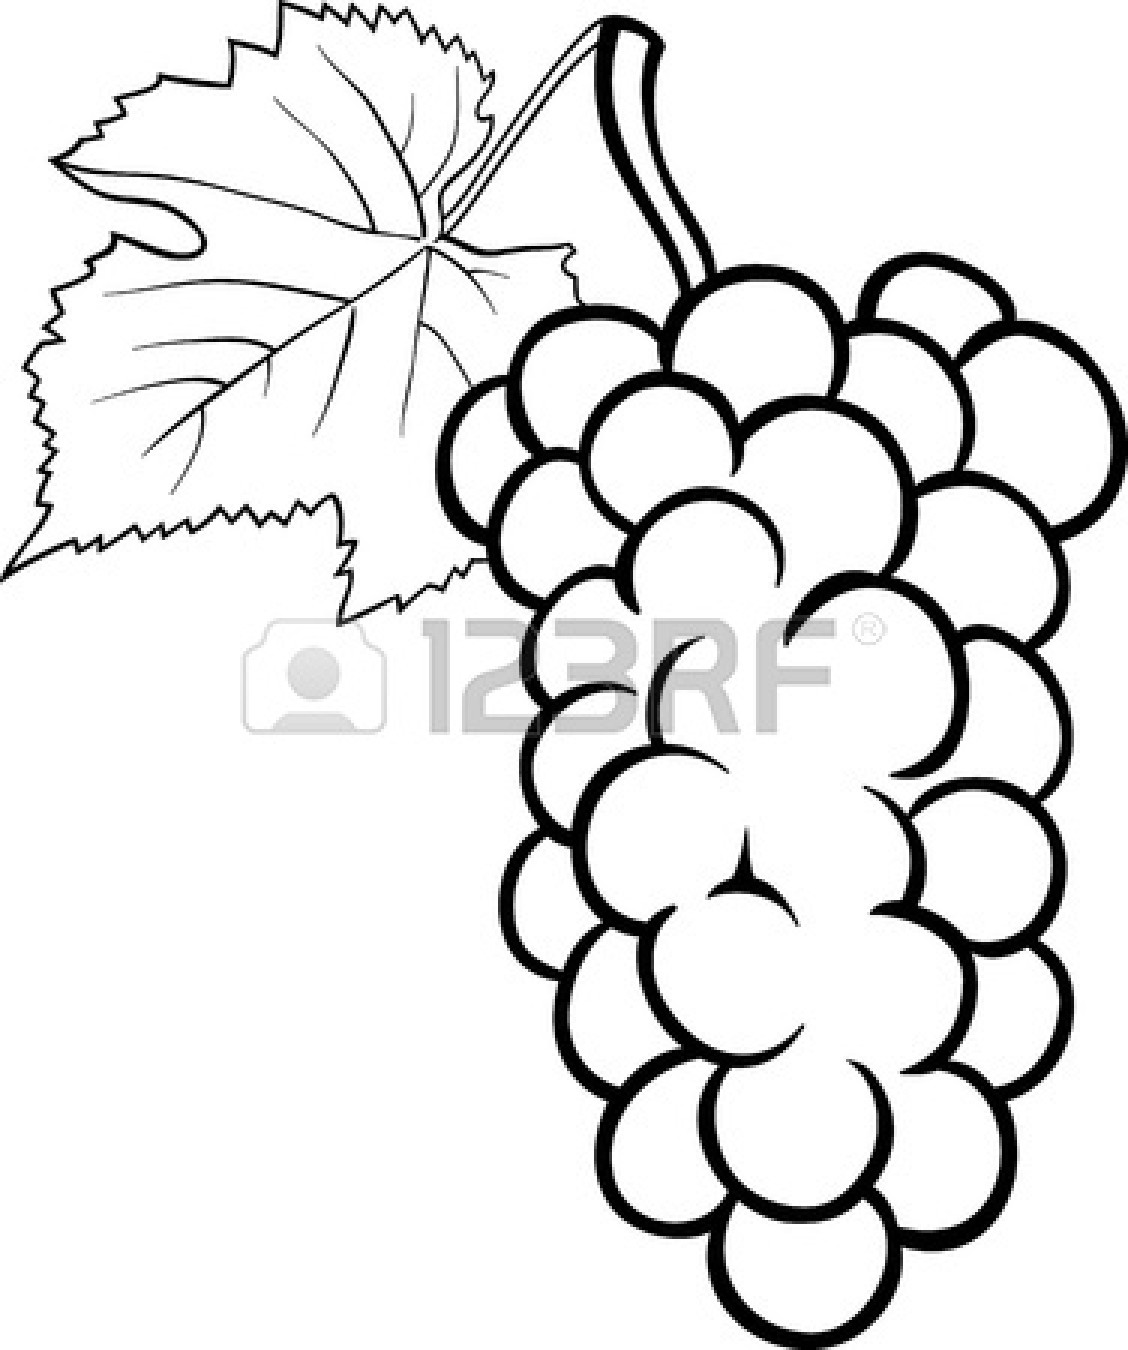 Clipart Black And White Fruit And Vegetable Clipart Black And White